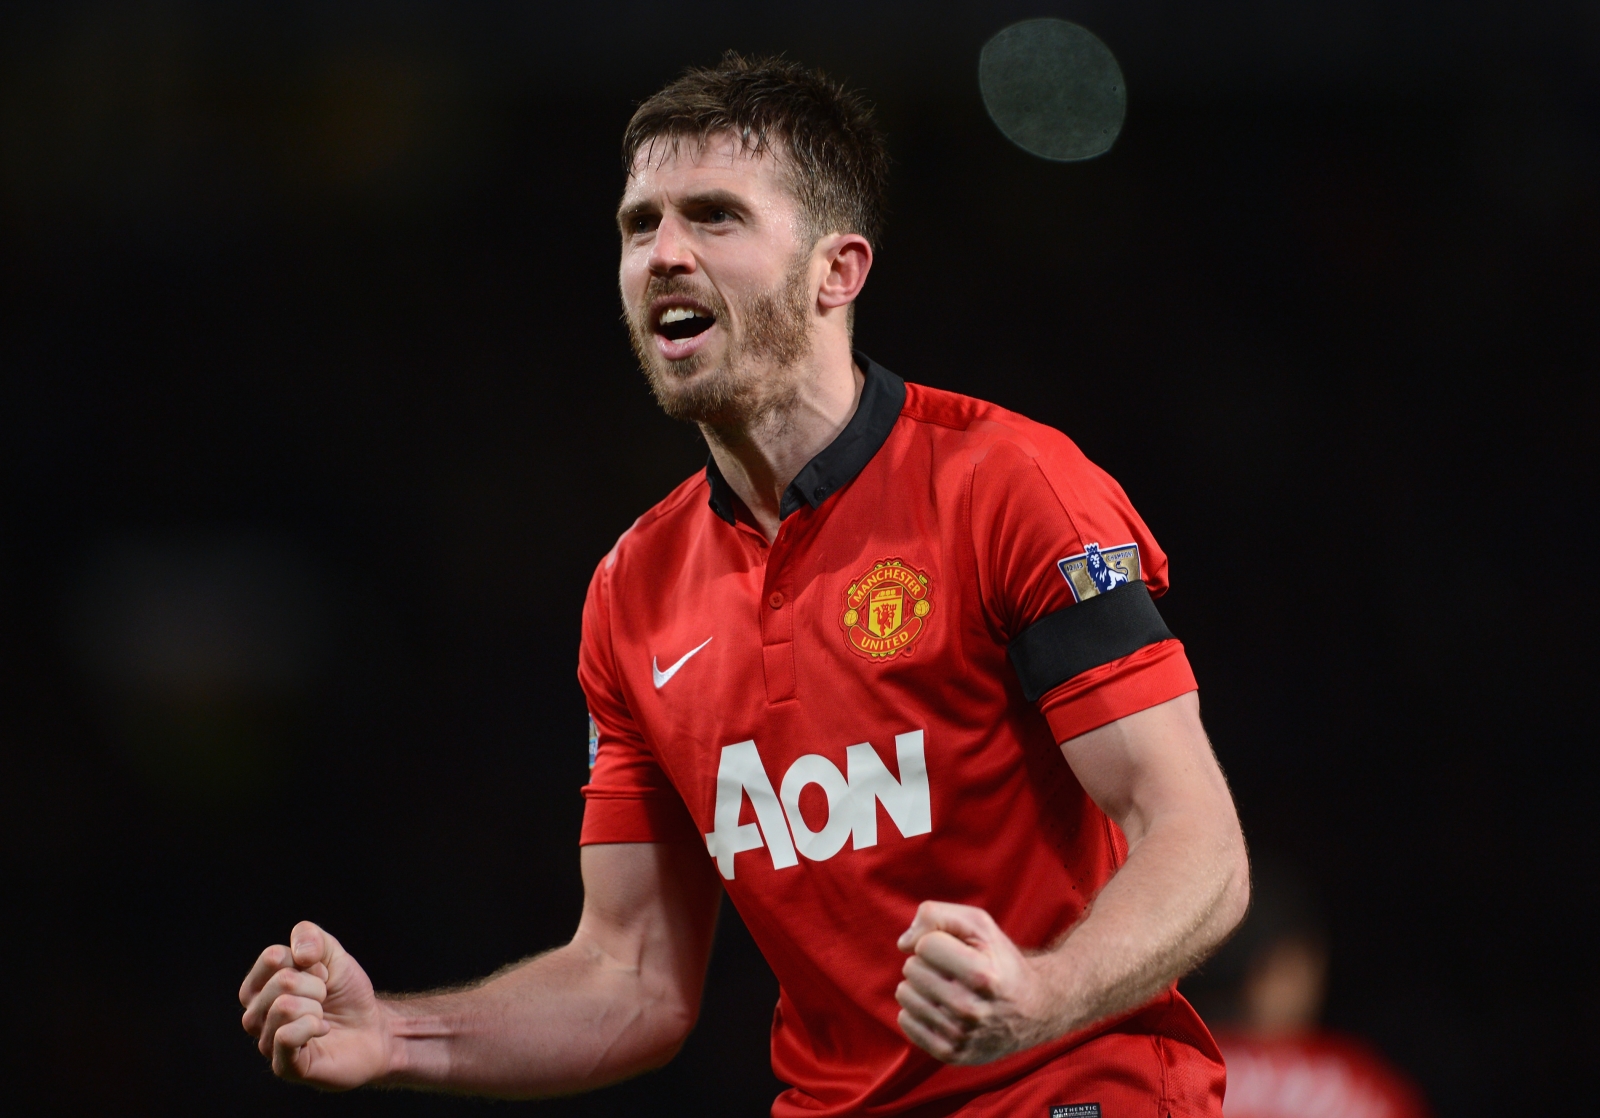 Michael Carrick during his playing days at Manchester United.